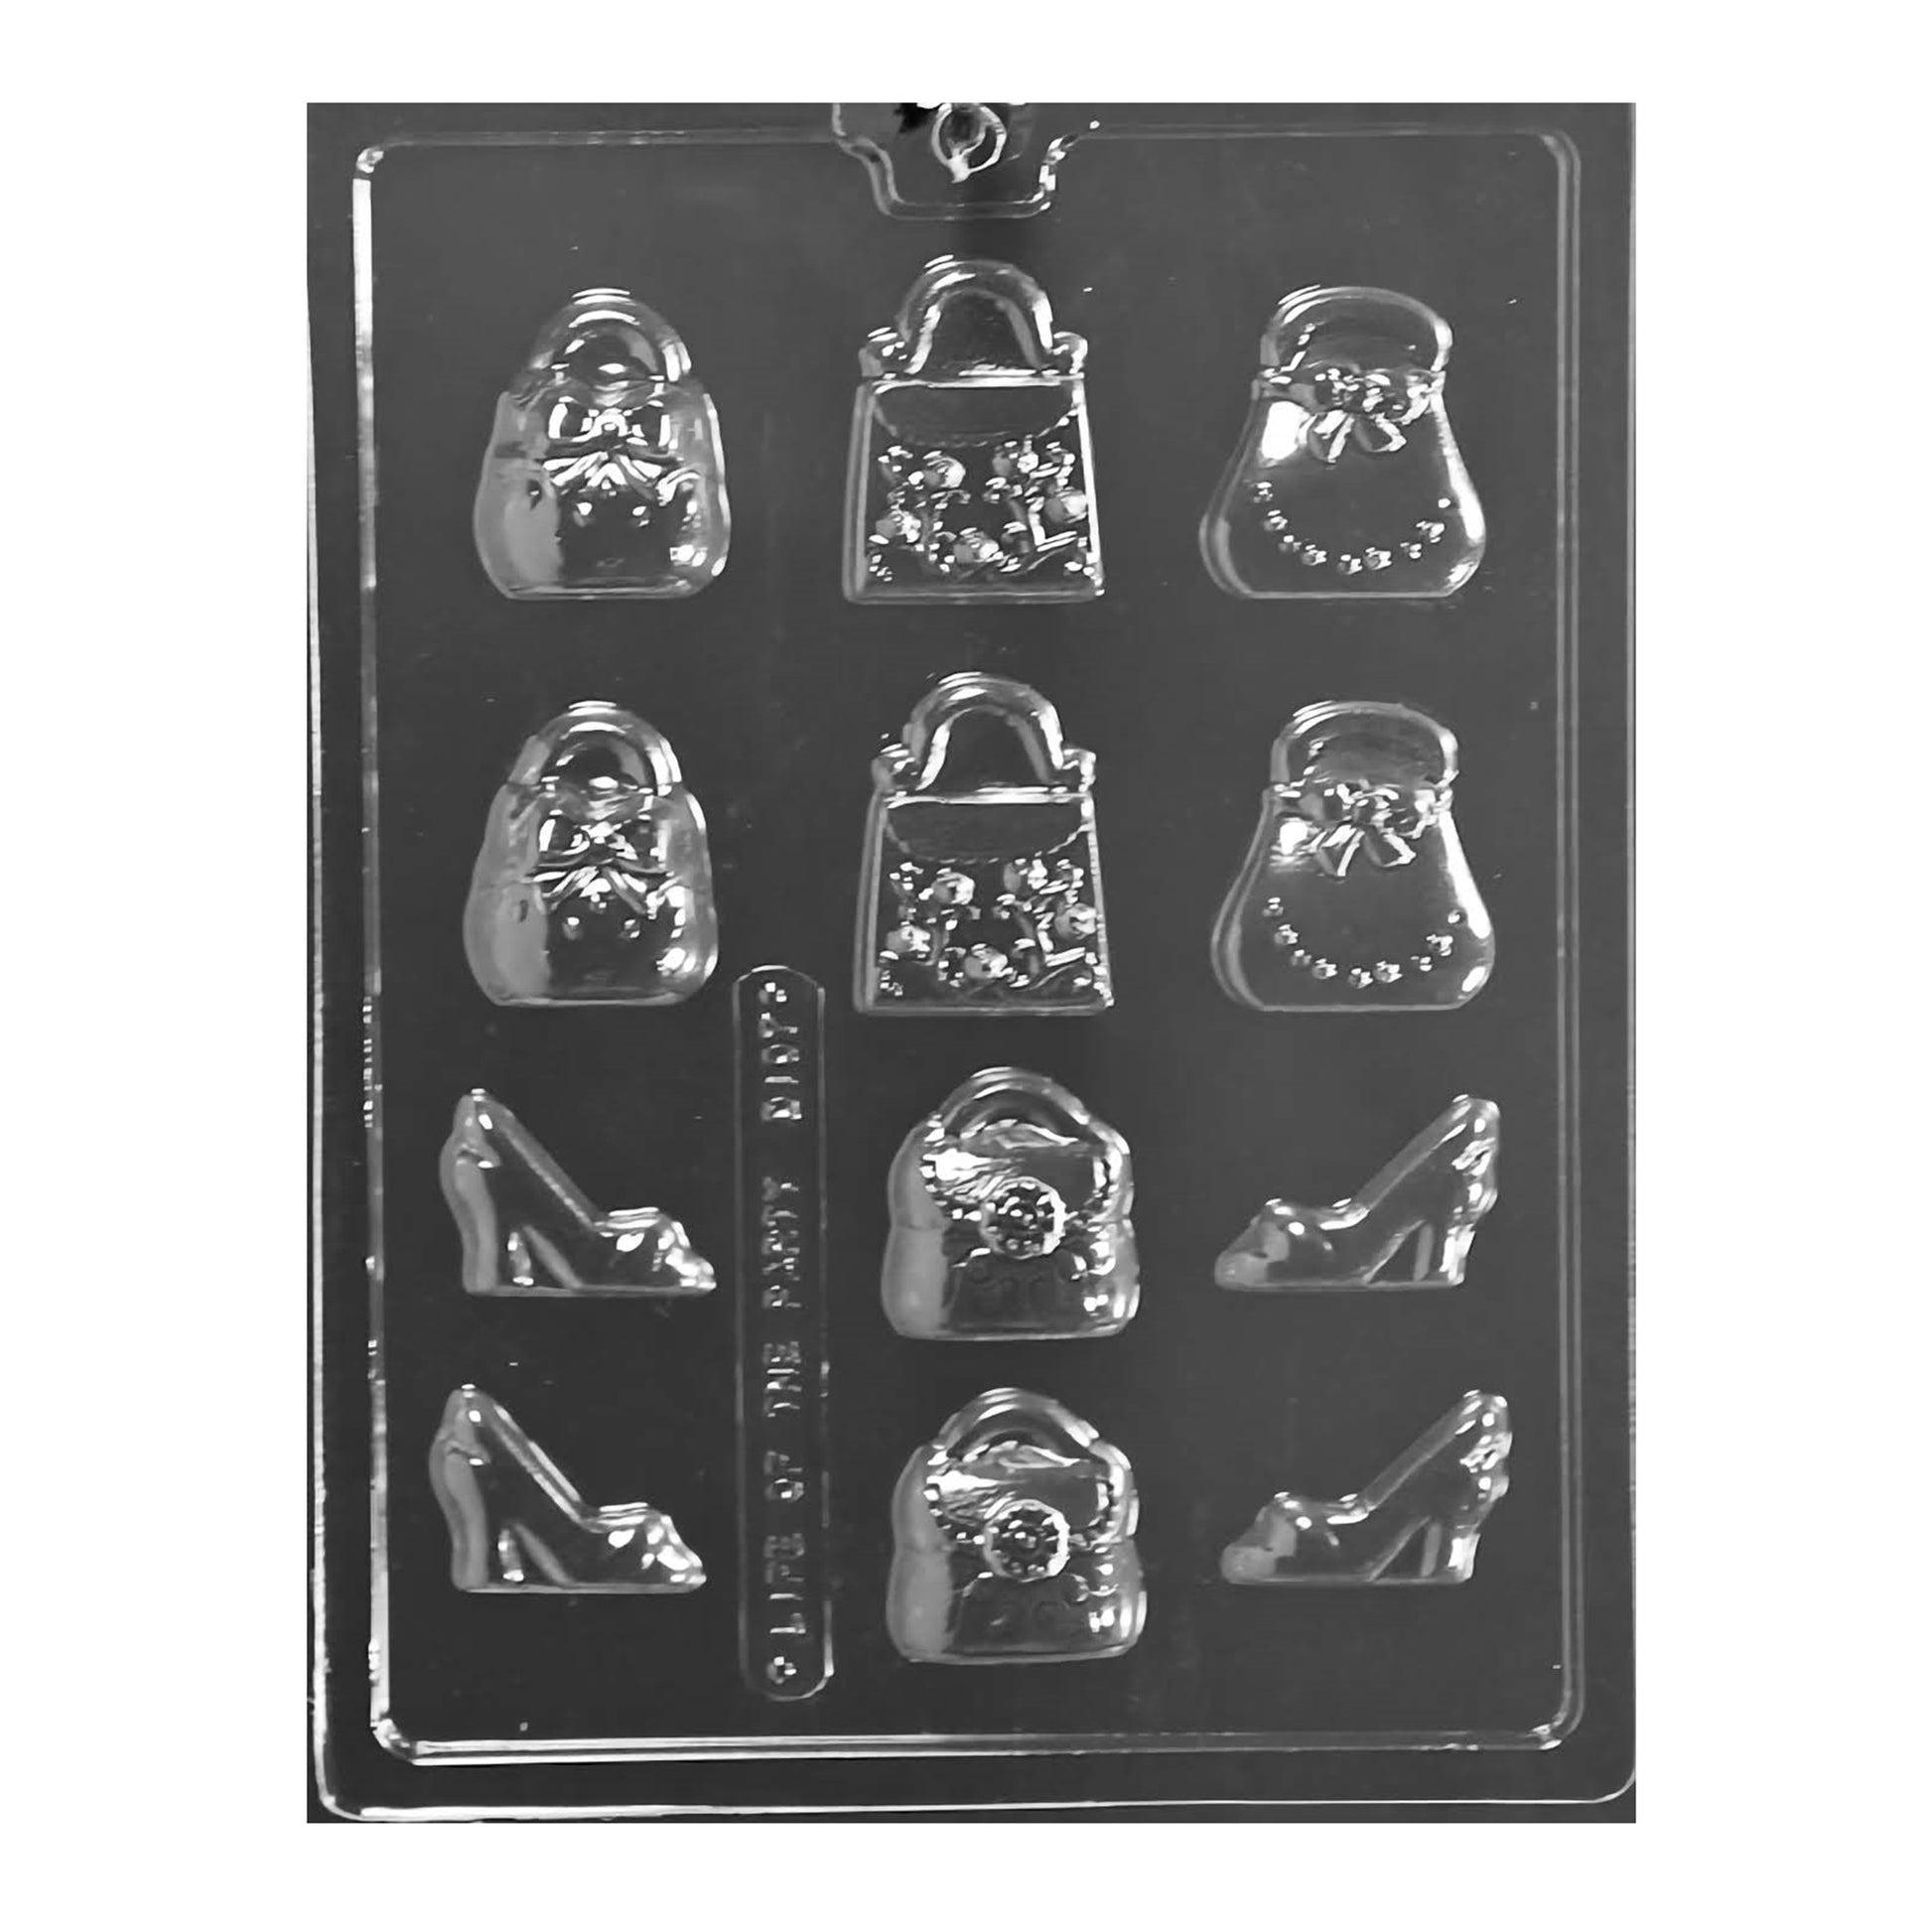 Fashion-inspired chocolate mold featuring high heels and handbag shapes, perfect for stylish party favors or boutique bakery offerings.